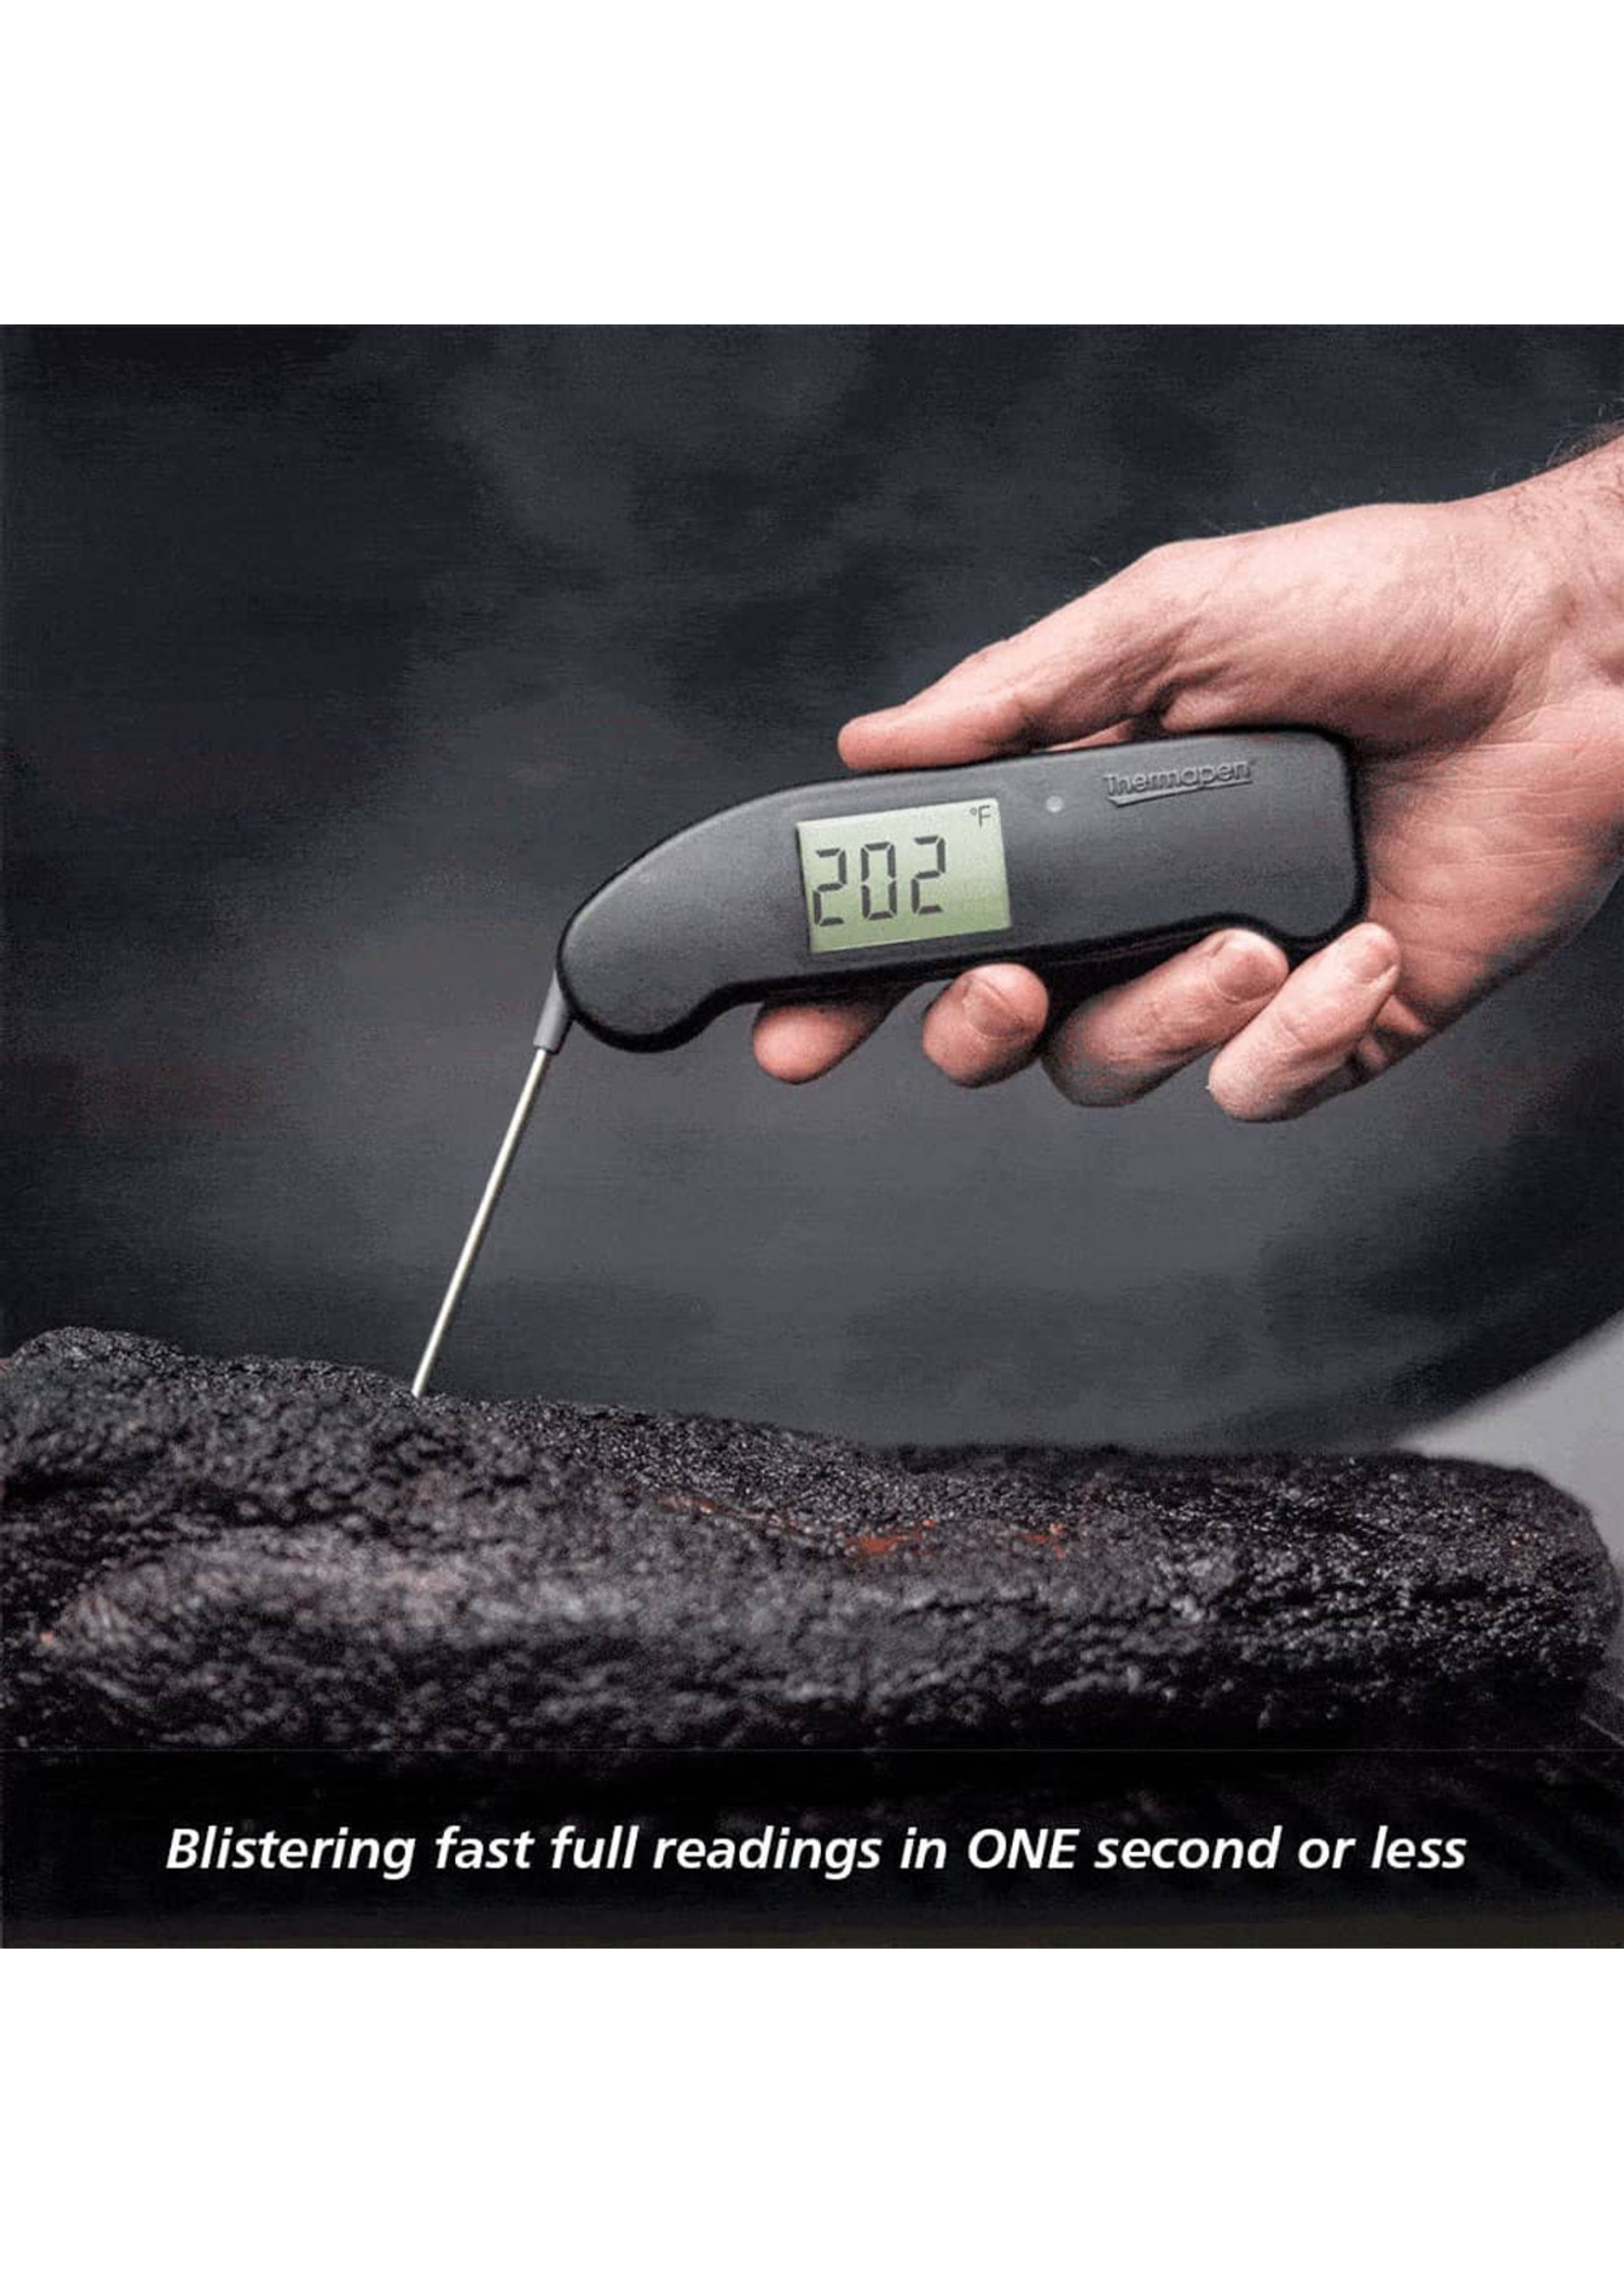 https://cdn.shoplightspeed.com/shops/650538/files/47646992/1652x2313x2/thermoworks-thermoworks-thermapen-one.jpg